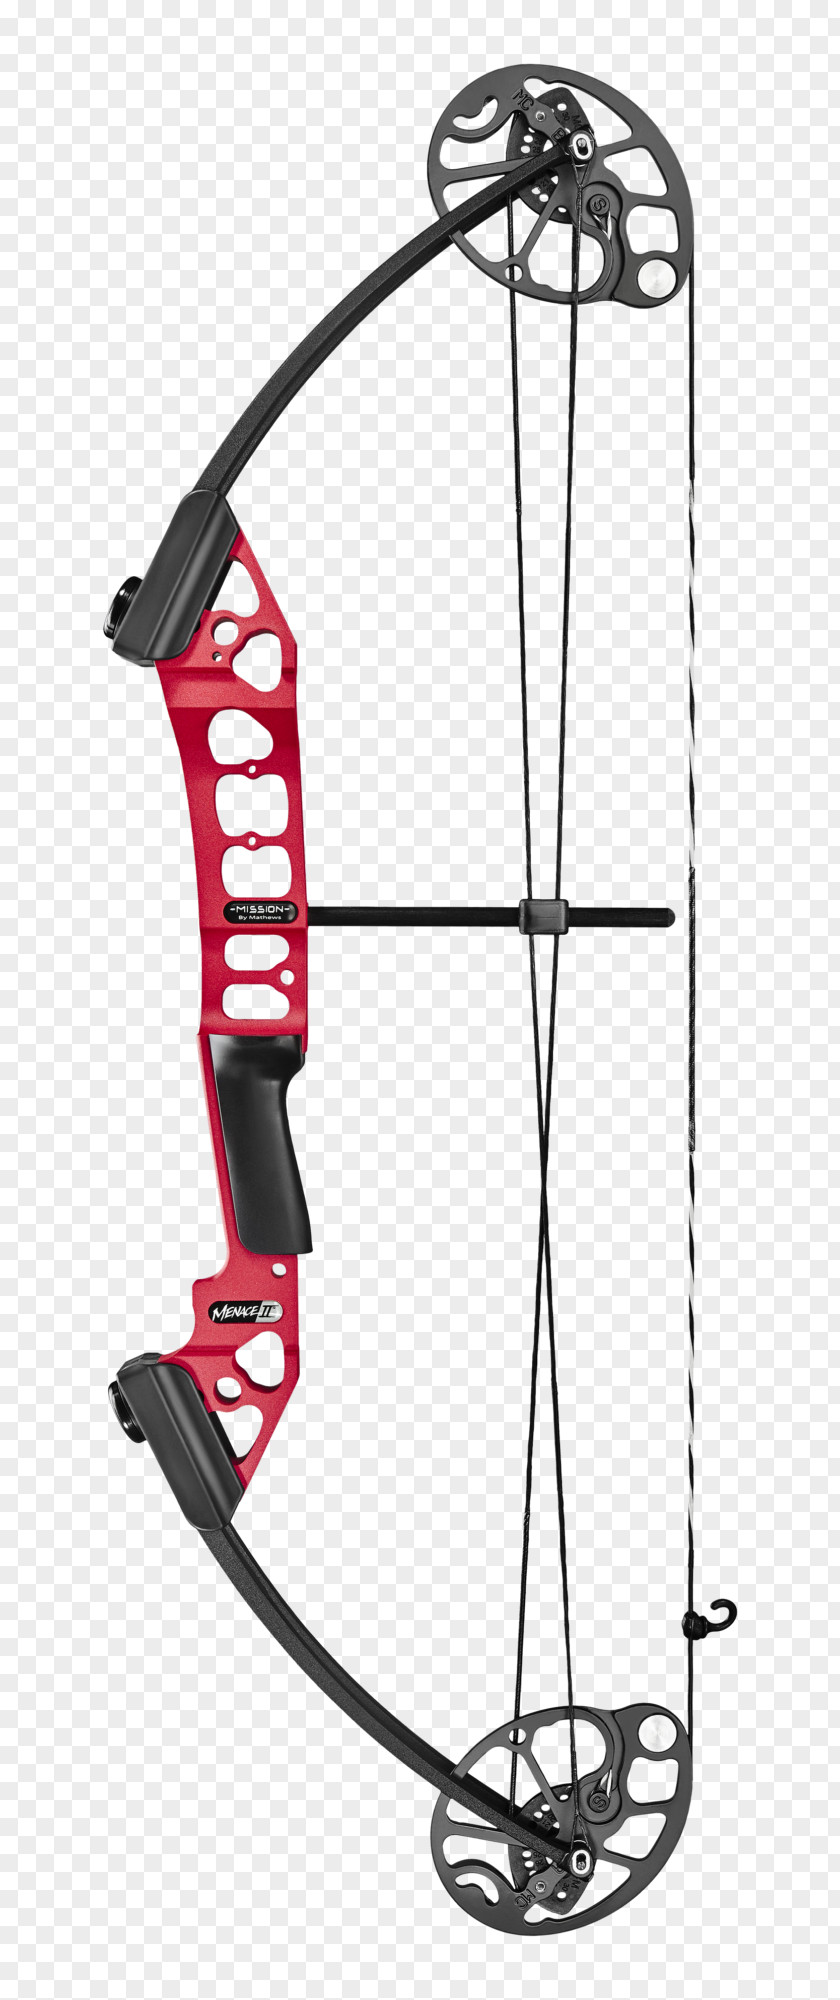 Archery Equipment Compound Bows Bow And Arrow Recurve PNG